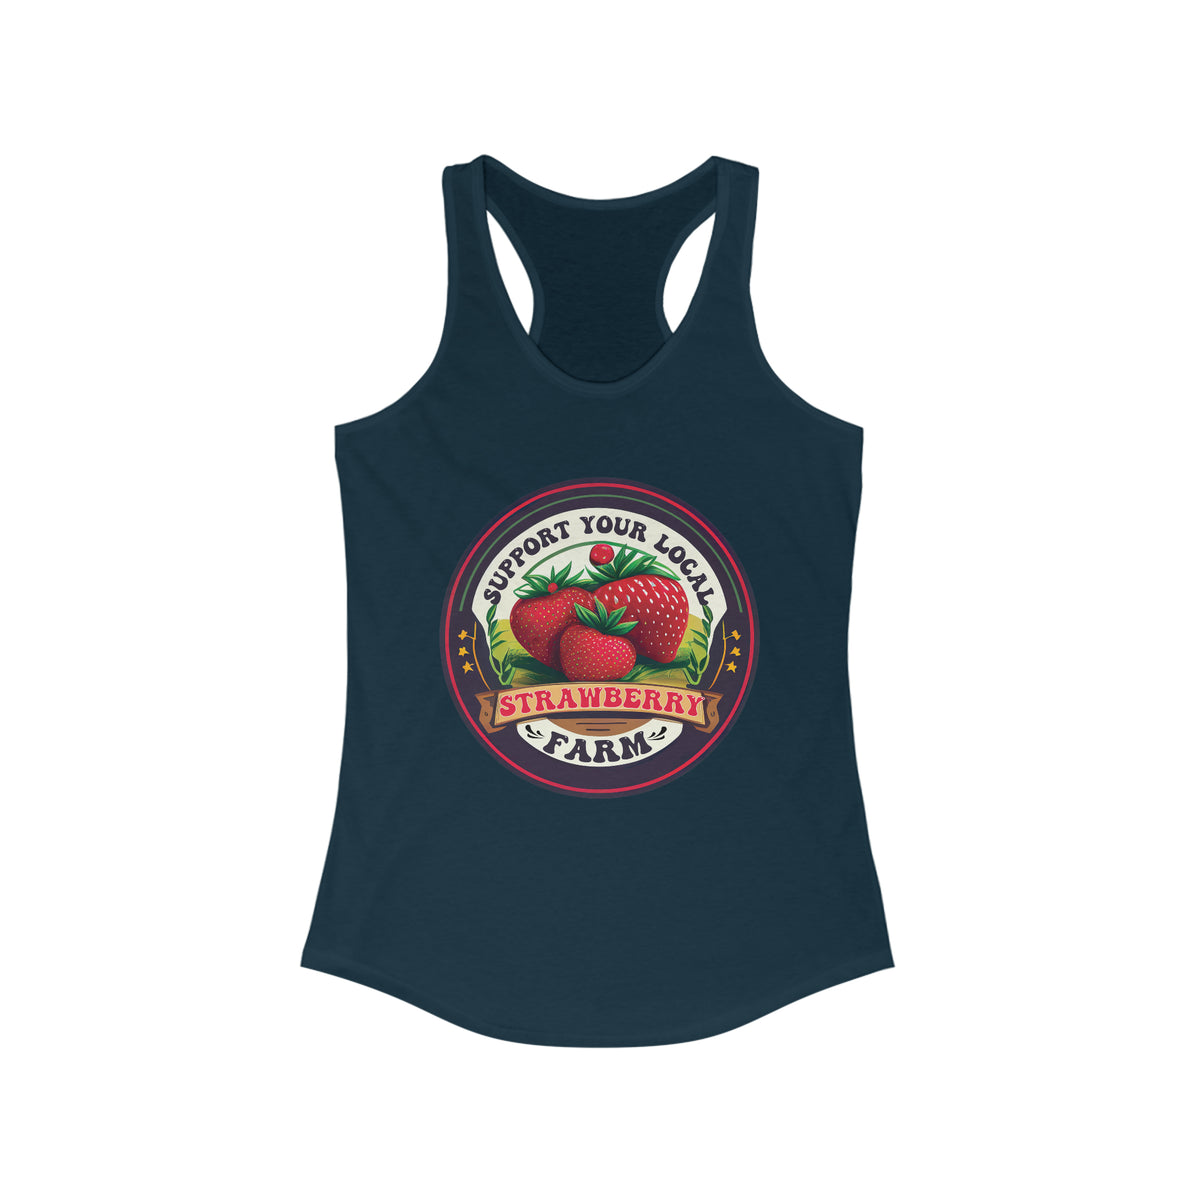 Support Your Local Strawberry Farm Shirt | Strawberry Shirt | Aesthetic Fruit Shirt | Cute Farm Gifts | Women's Slim Fit Racerback Tank